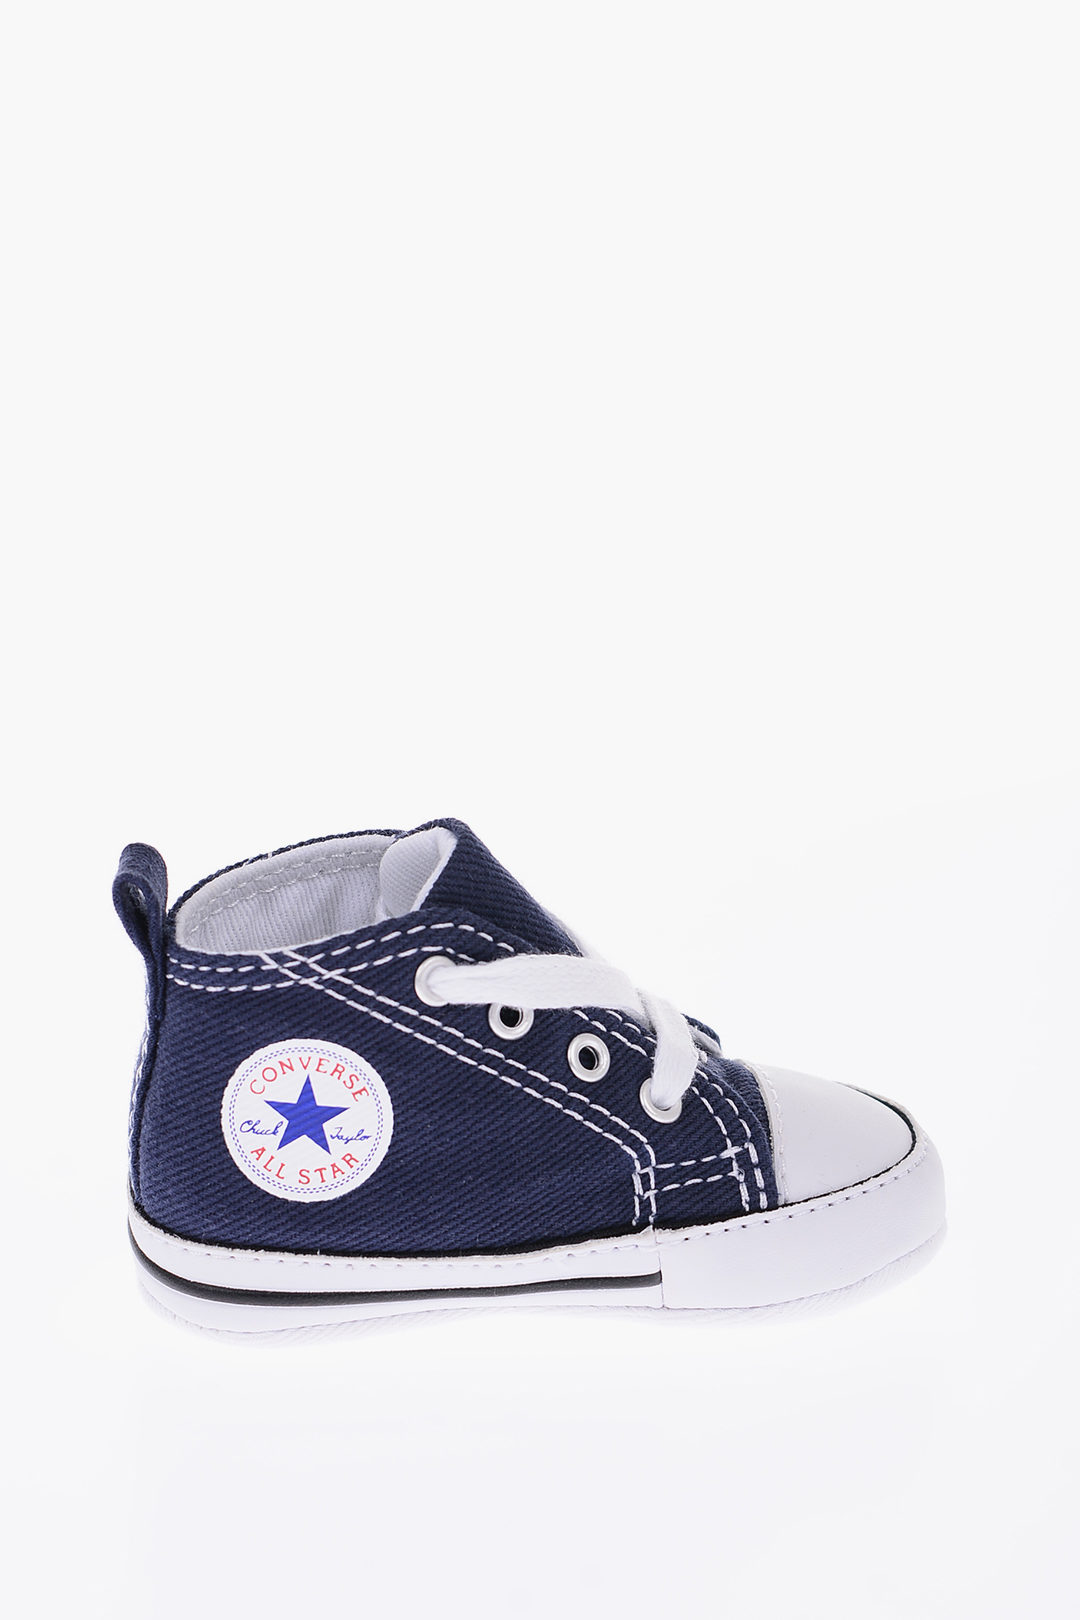 Converse KIDS ALL STAR CHUCK TAYLOR Fabric FIRST STAR Sneakers unisex ...